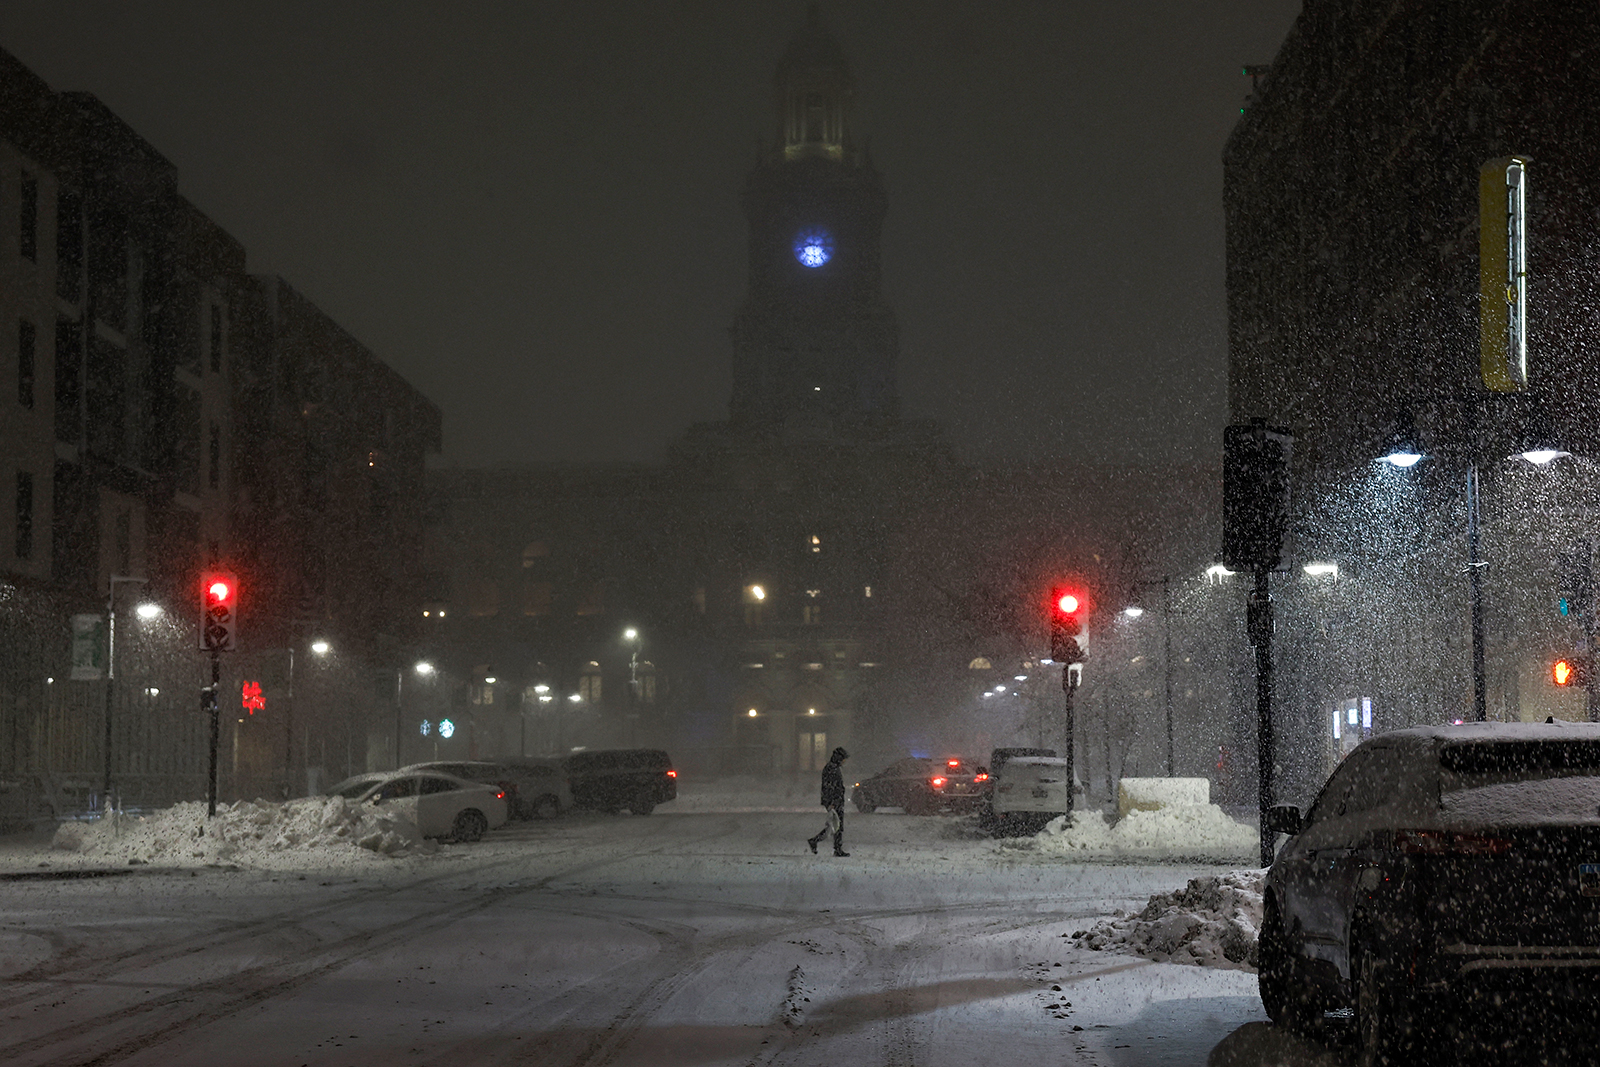 A pedestrian walks in the streets of downtown Des Moines, Iowa, during a snow squall on Wednesday.